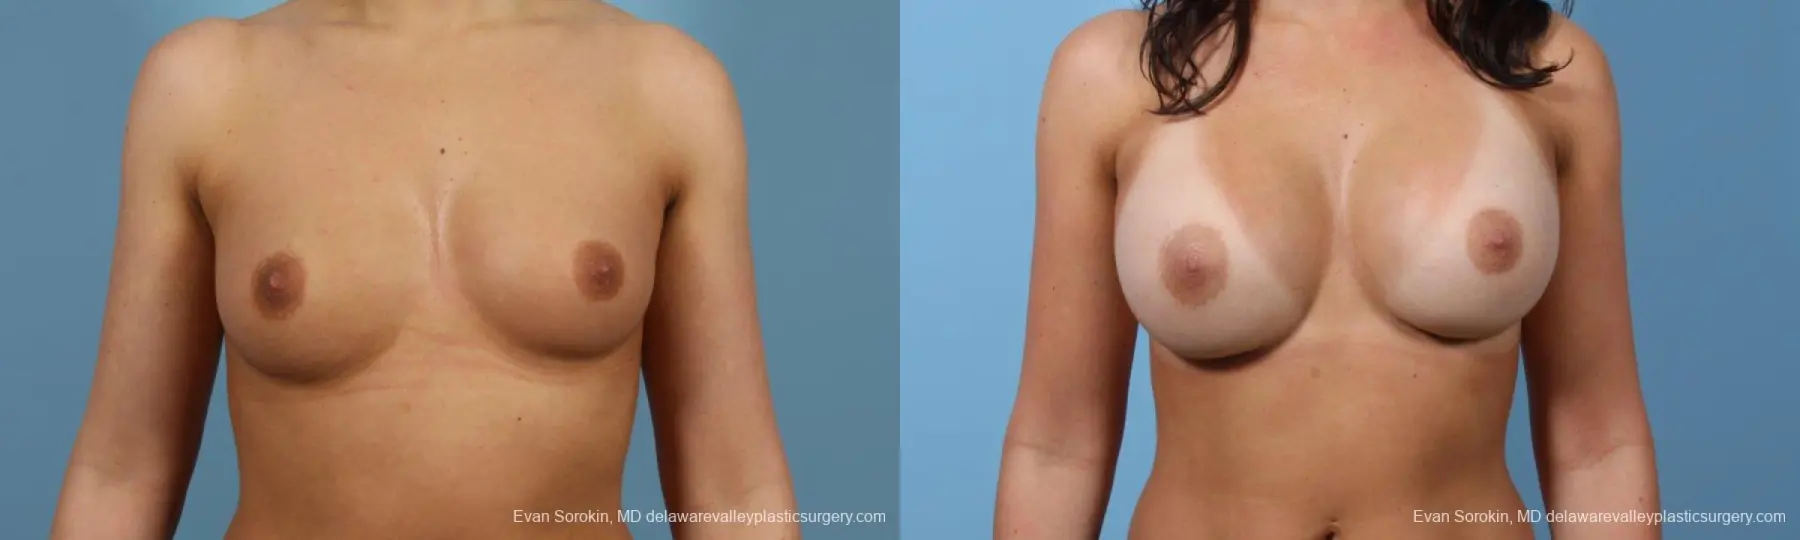 Philadelphia Breast Augmentation 8643 - Before and After 1